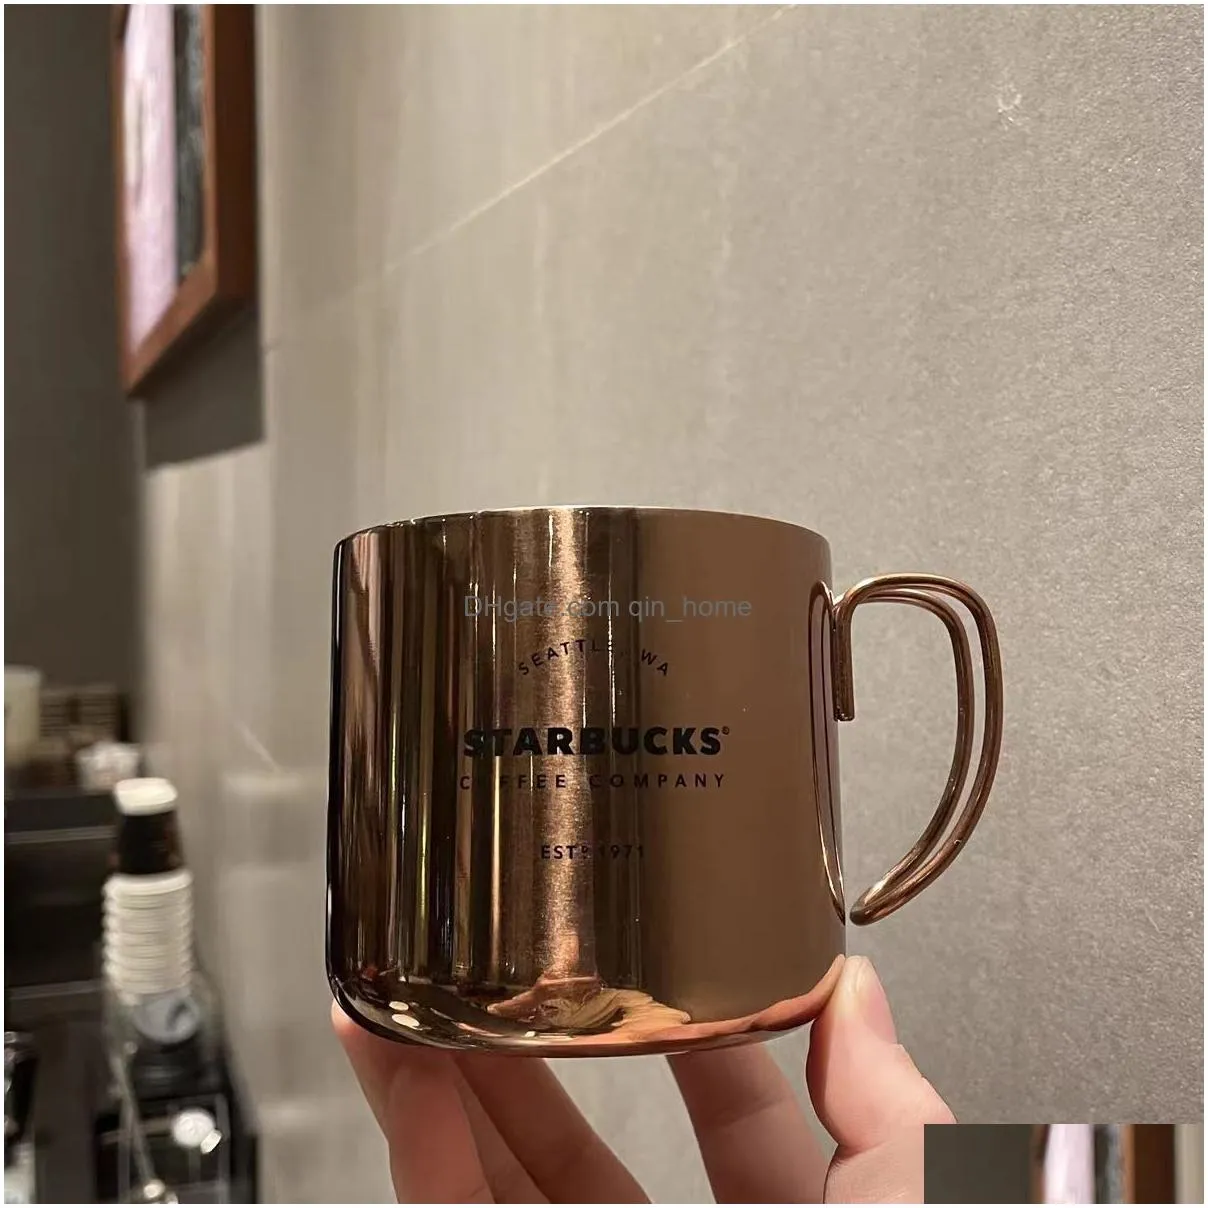 designer classic high appearance electroplated mug 304 stainless steel office desktop coffee cup with anti drop handle couple cuptea cup resistance to